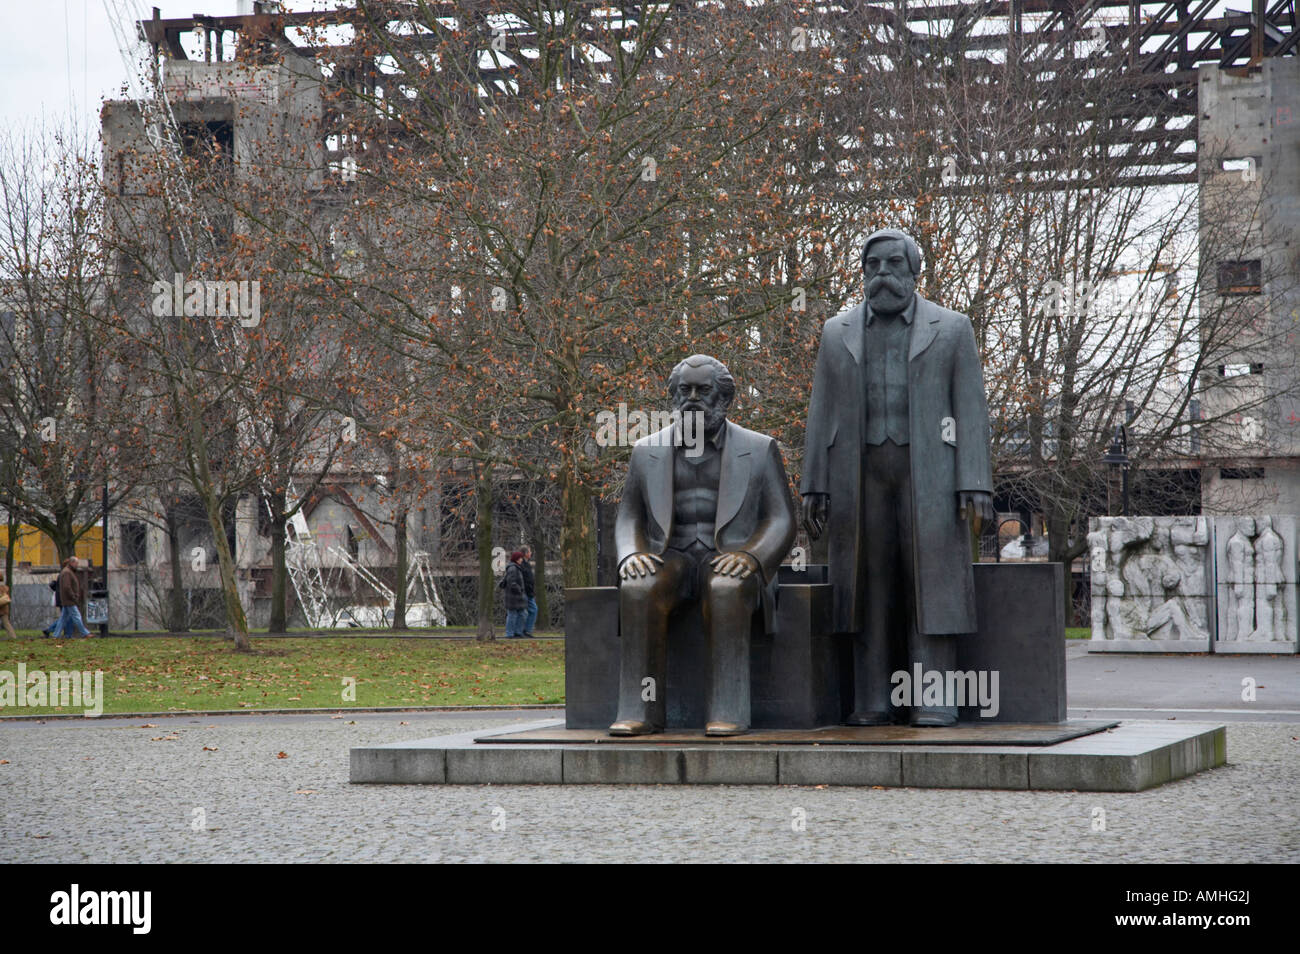 statues of marx and engels with deconstruction of the palast der republik in the background Berlin Germany Stock Photo